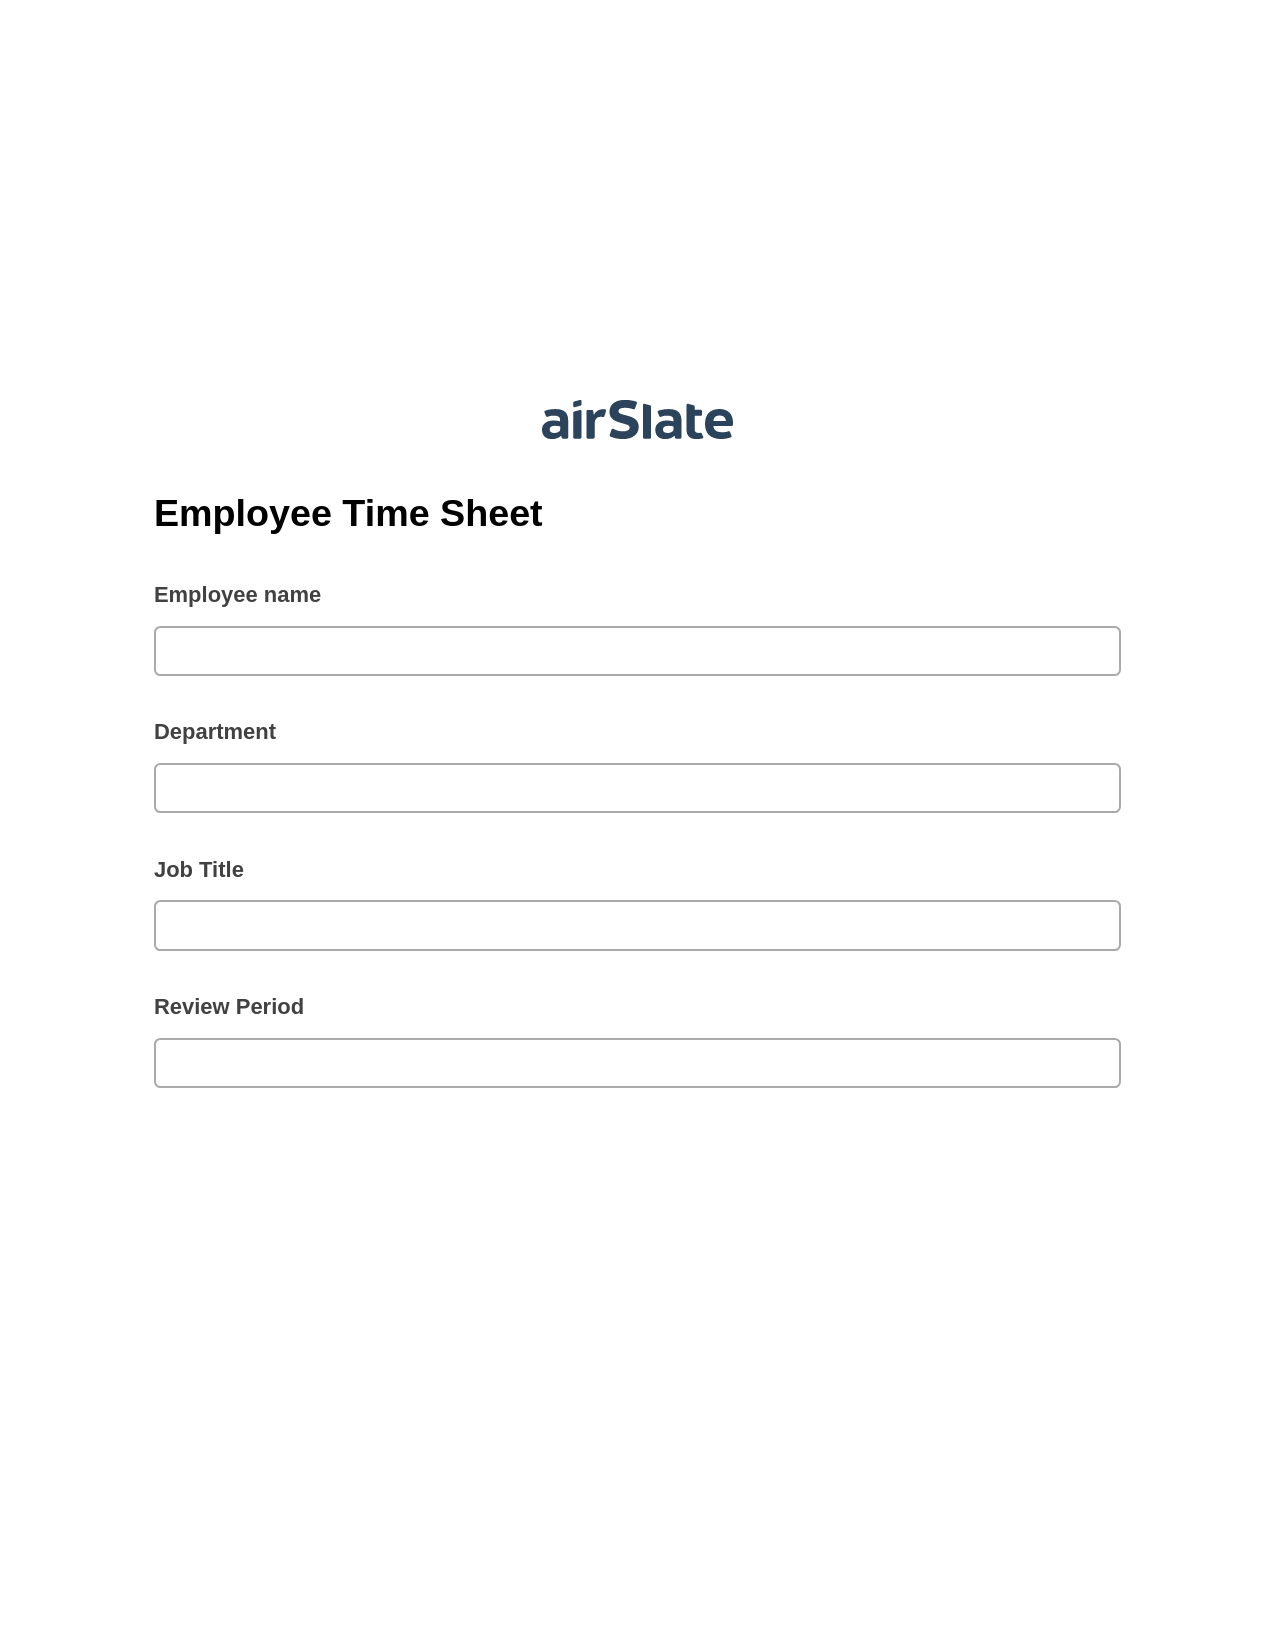 Employee Time Sheet Pre-fill from Google Sheets Bot, Create slate addon, Archive to Google Drive Bot